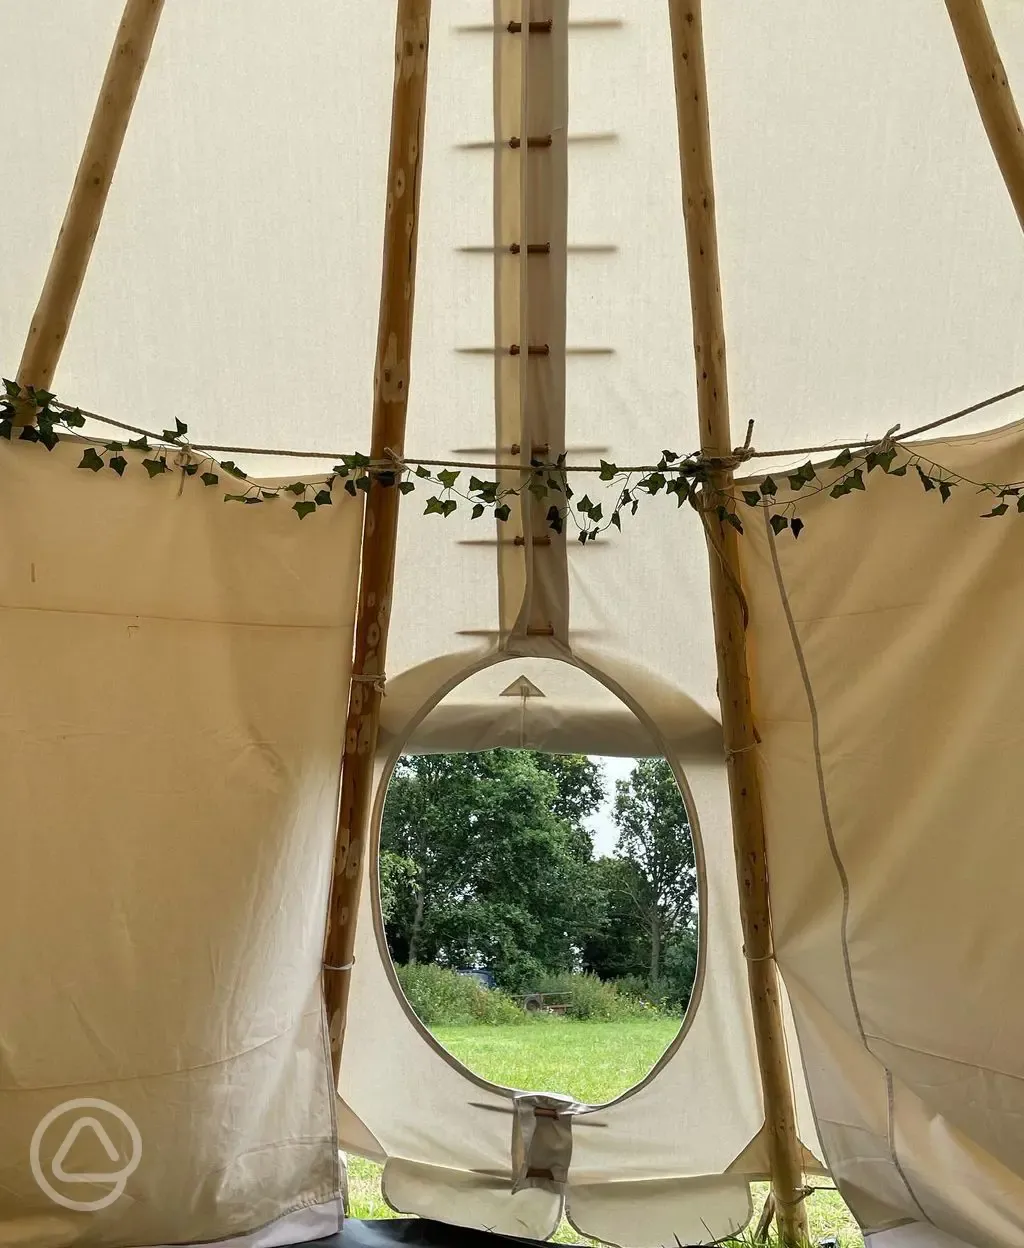 View from inside the Tipi 